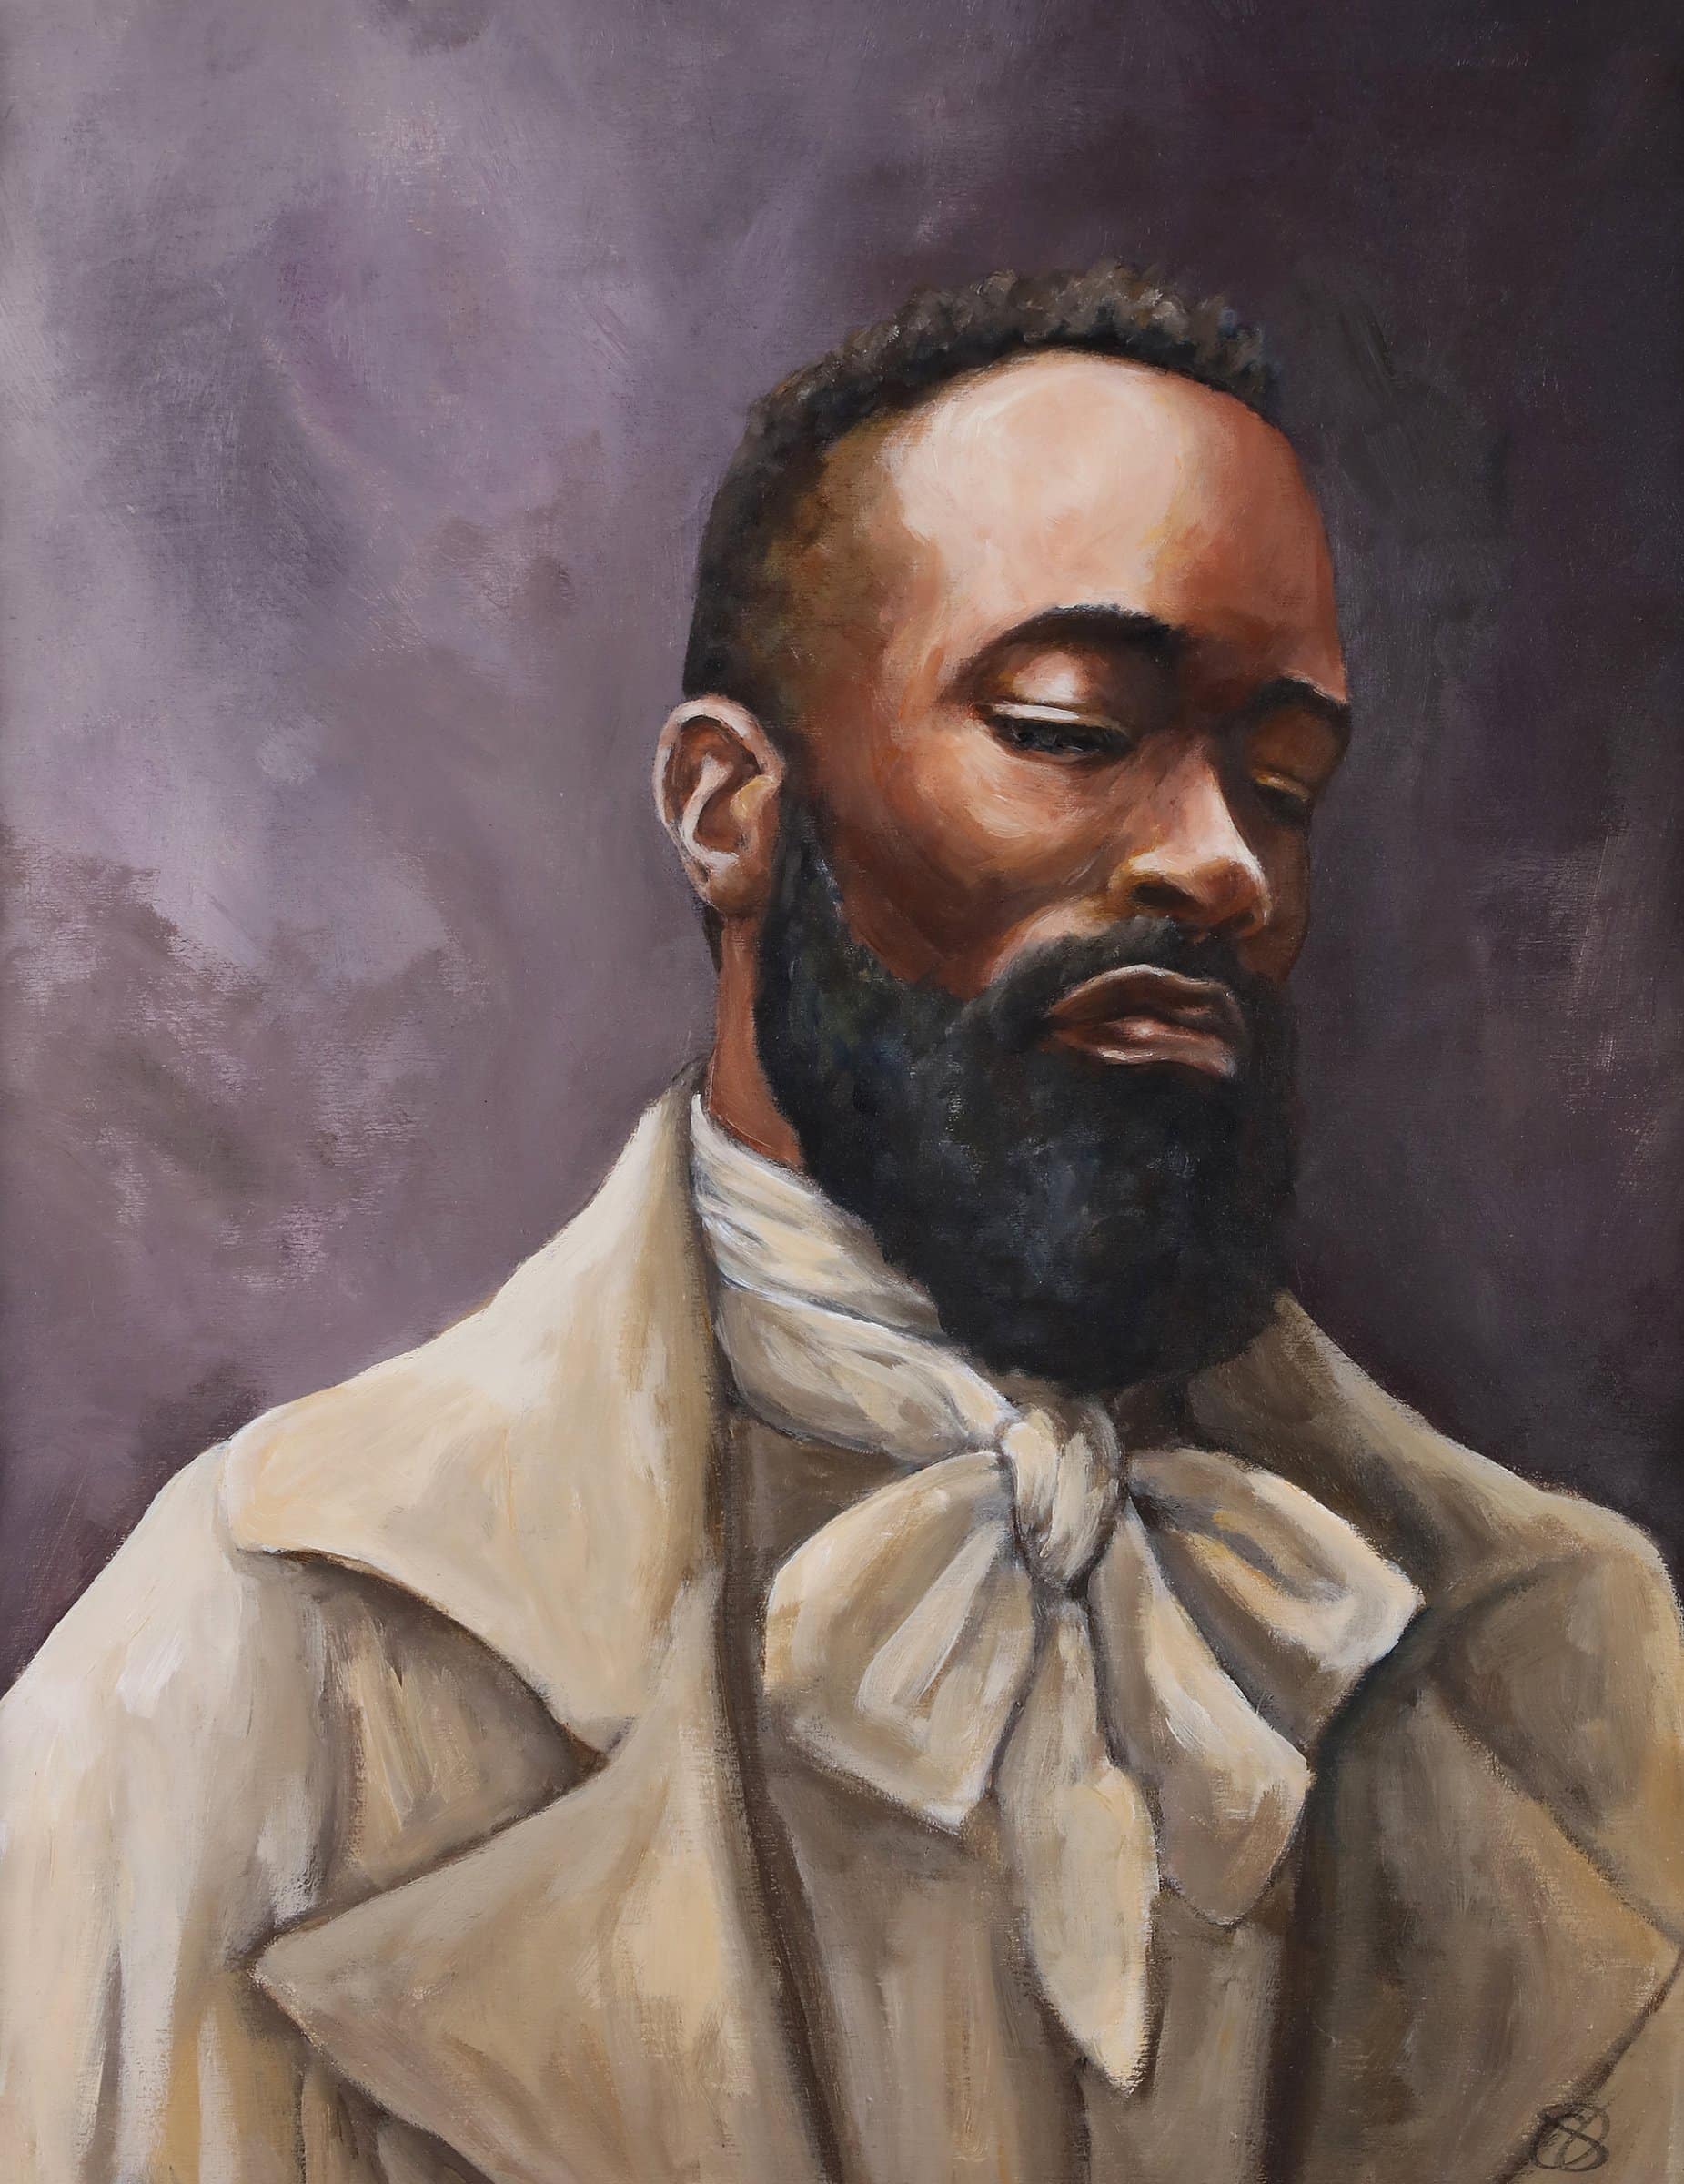 Portrait of a Black man with short hair and a beard. His eyes are closed with a solemn expression on his face. He is wearing a cream coloured day jacket and a shirt with a bow at the neck-line. The garments are as if they were out of the nineteenth century.